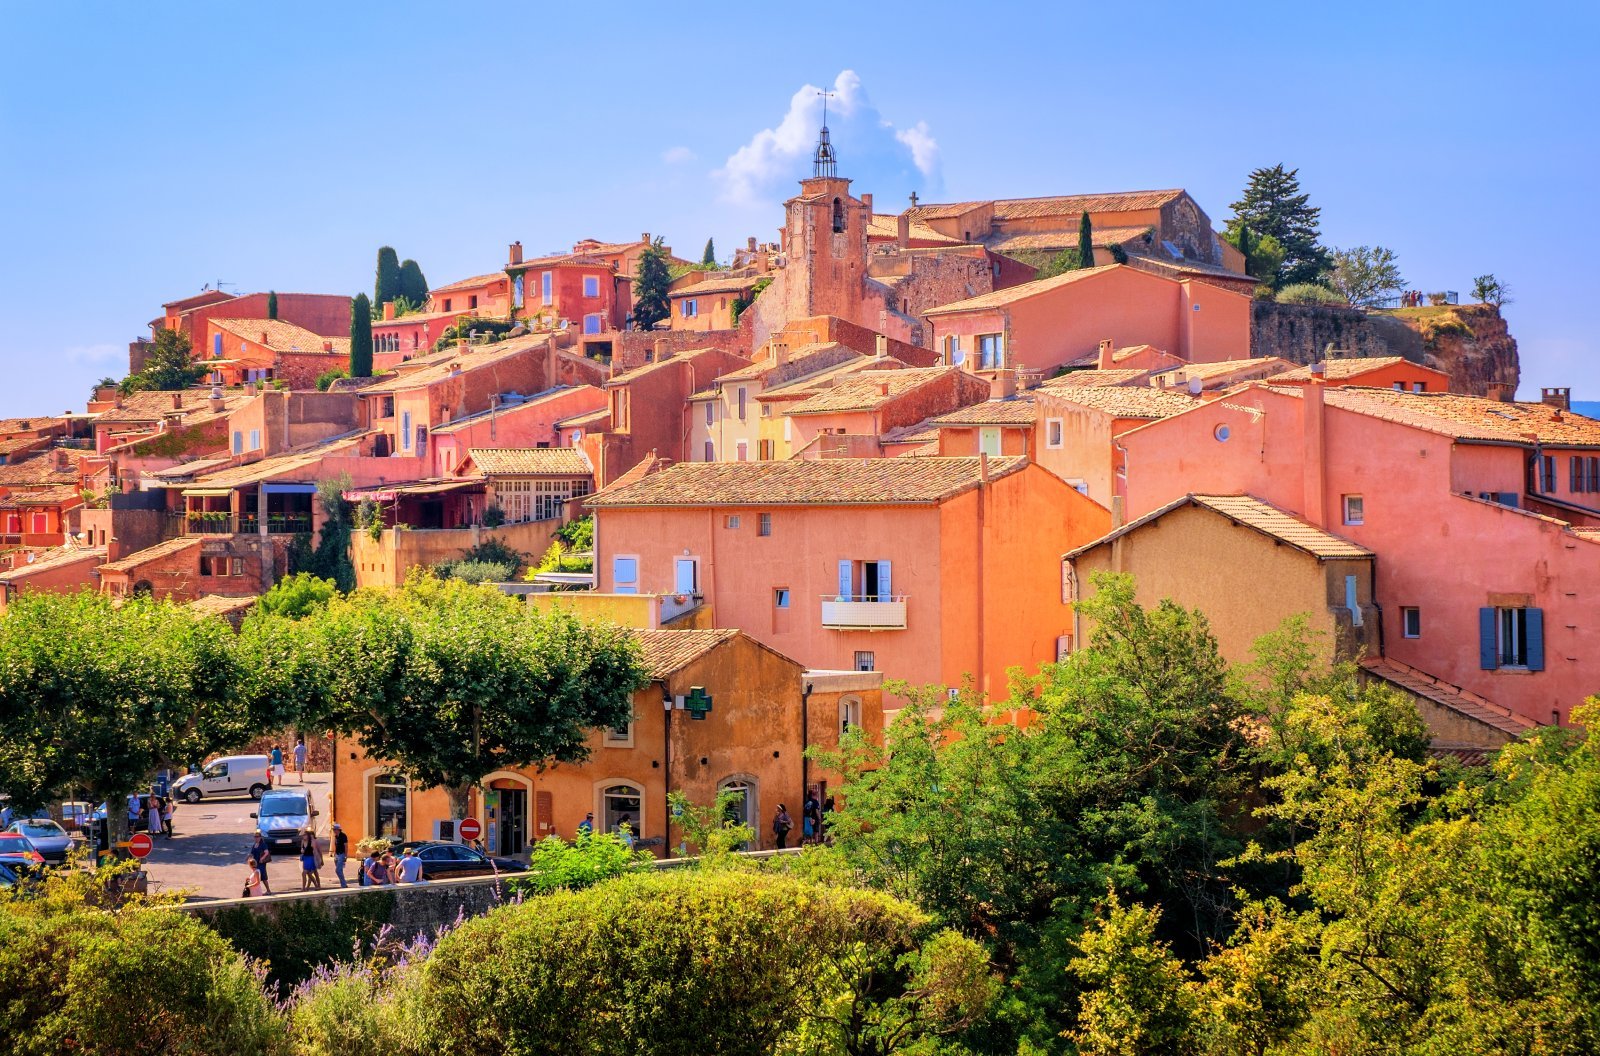 <p>Scattered across the country are villages like Eze and Rocamadour that seem untouched by time, offering a glimpse into France’s soulful rural life.</p>